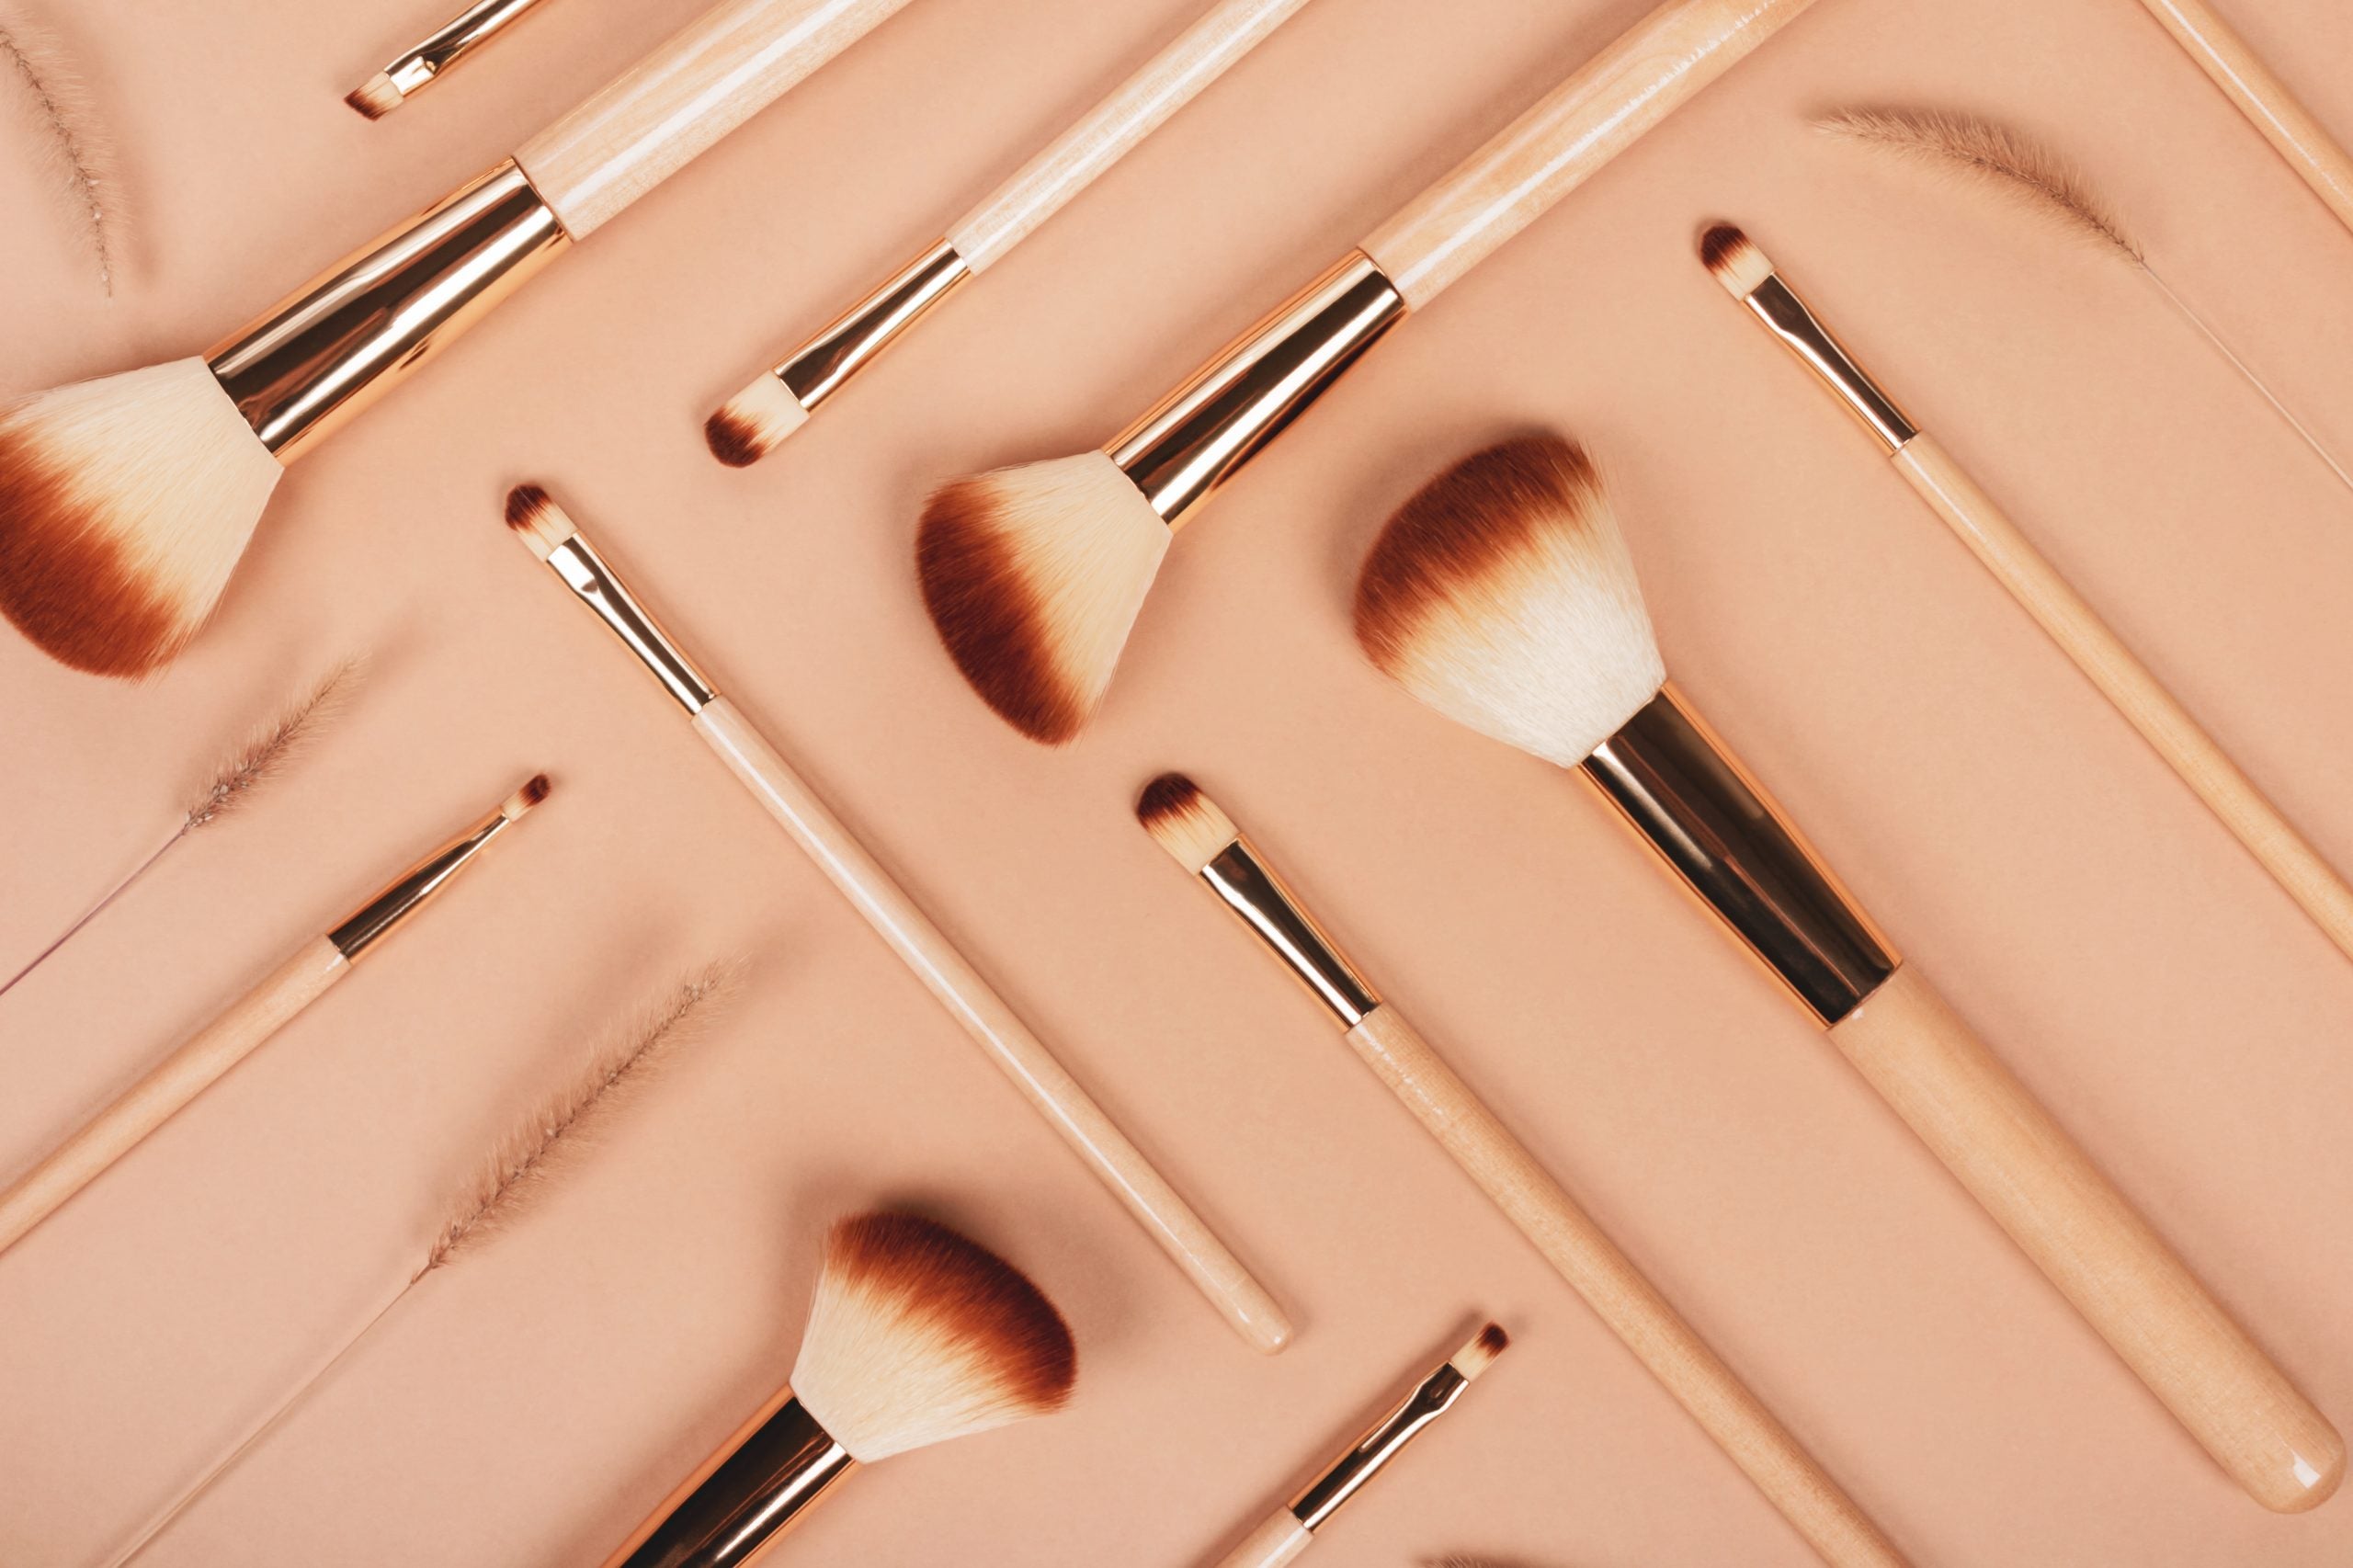 Makeup Brushes Are Great, But You Really Don't Need That Many of